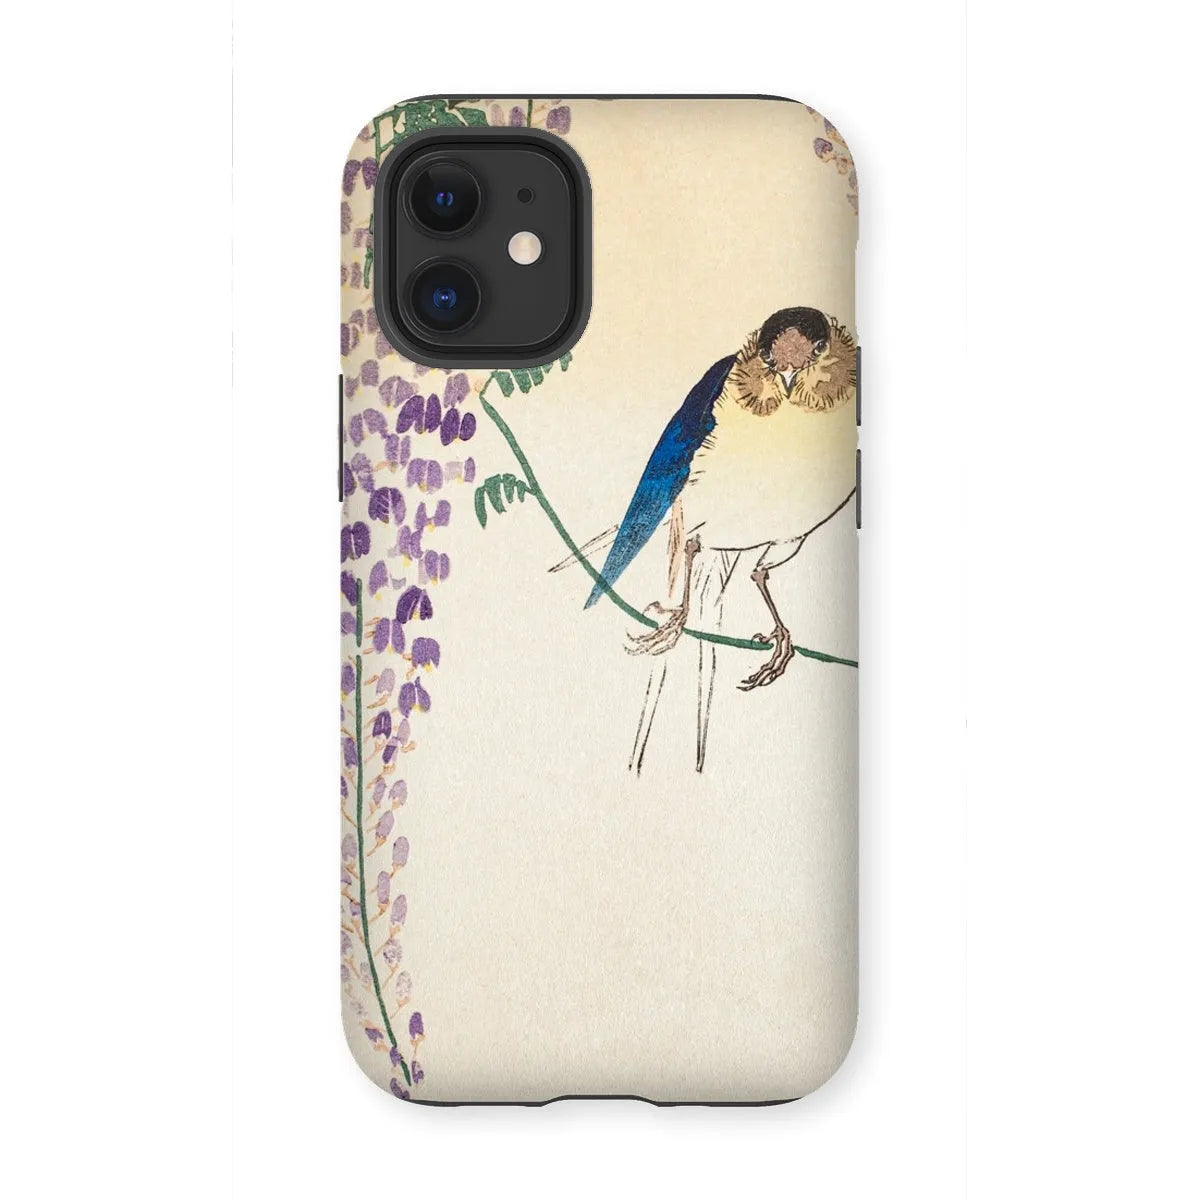 Wisteria And Swallow - Japanese Art Phone Case - Ohara Koson - Iphone 12 Mini / Matte - Mobile Phone Cases - Aesthetic